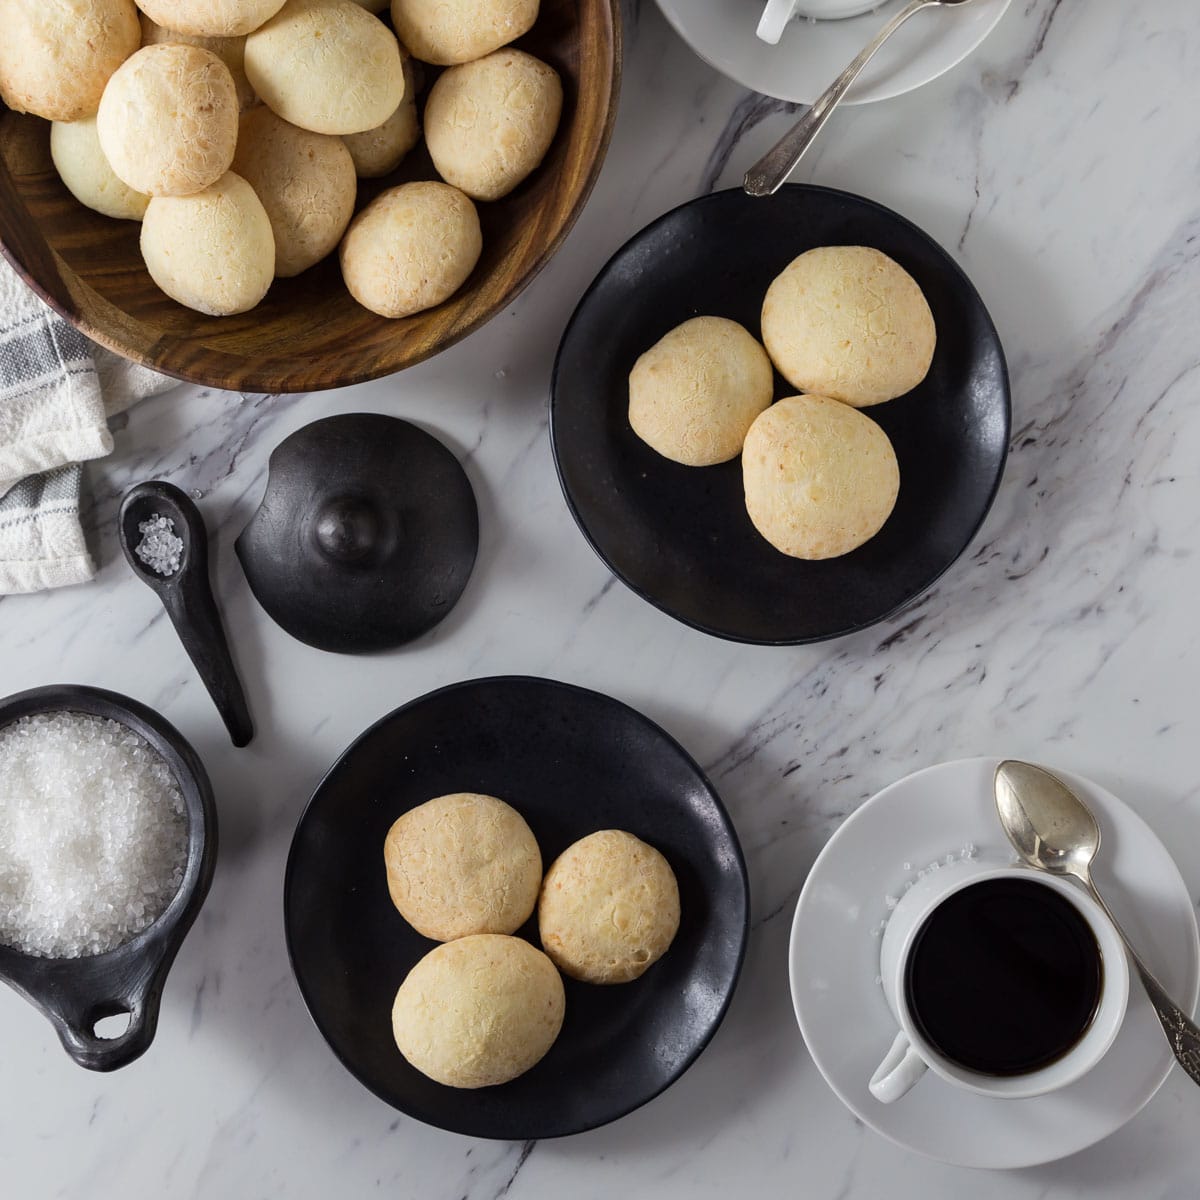 A photo of Brazilian cheese bread on a black plate with a wooden bowl and coffee cups.